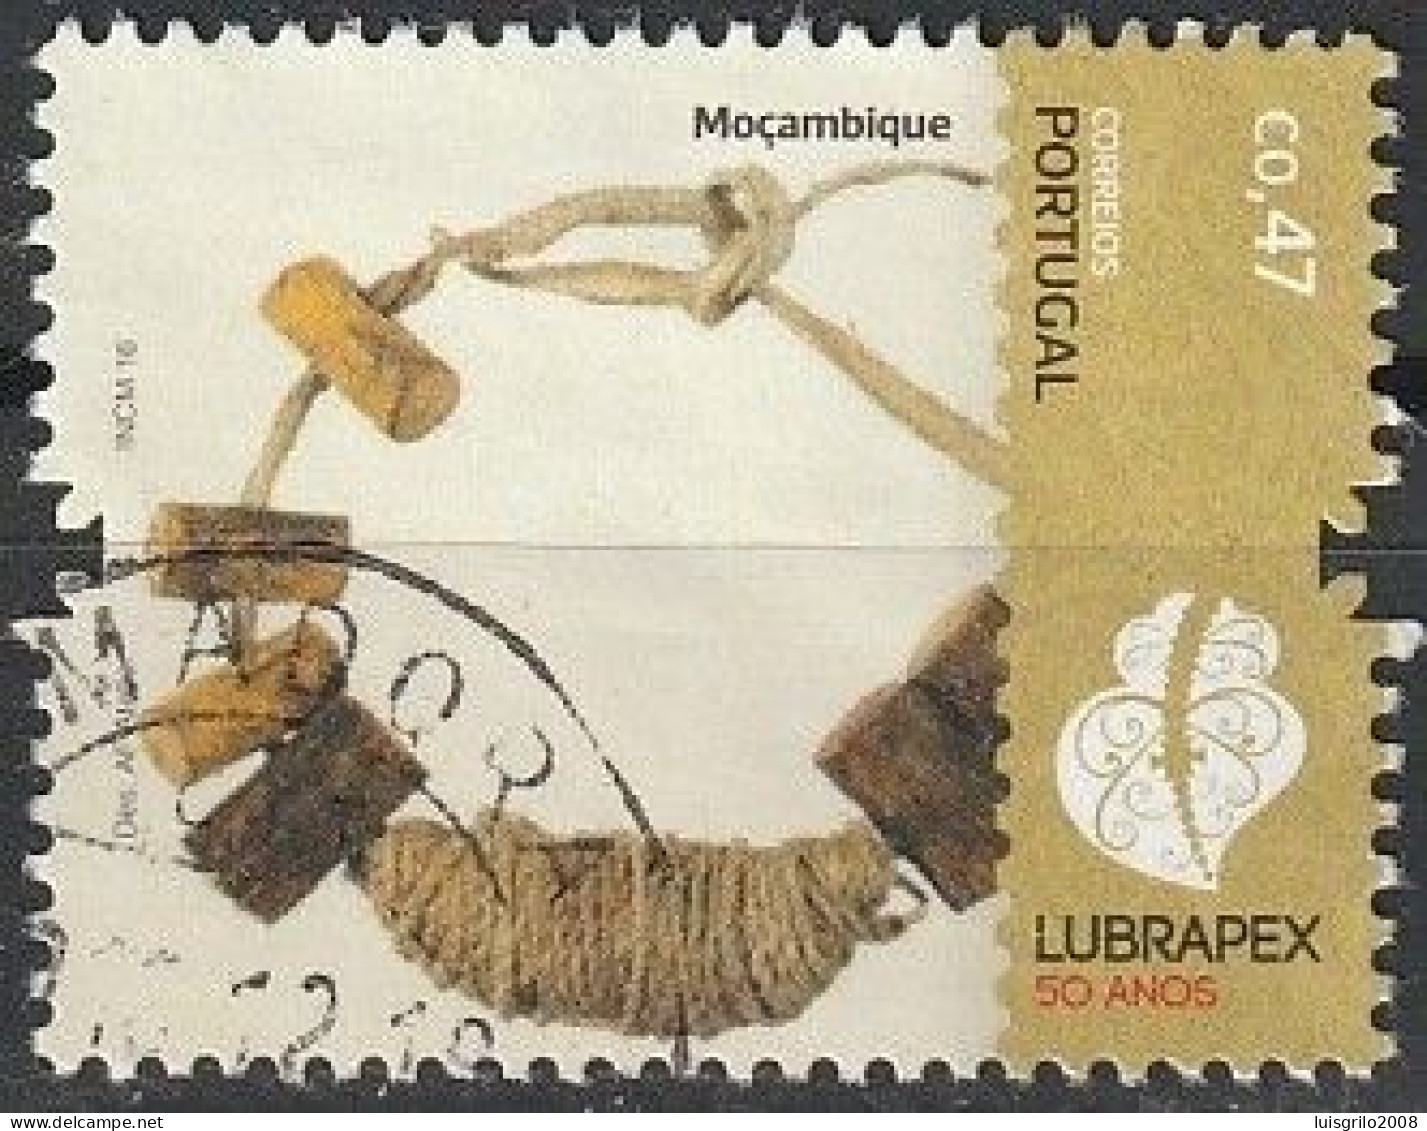 Portugal, 2016 - Lubrapex 50 Anos, €0,47 -|- Mundifil - 4680 - Used Stamps